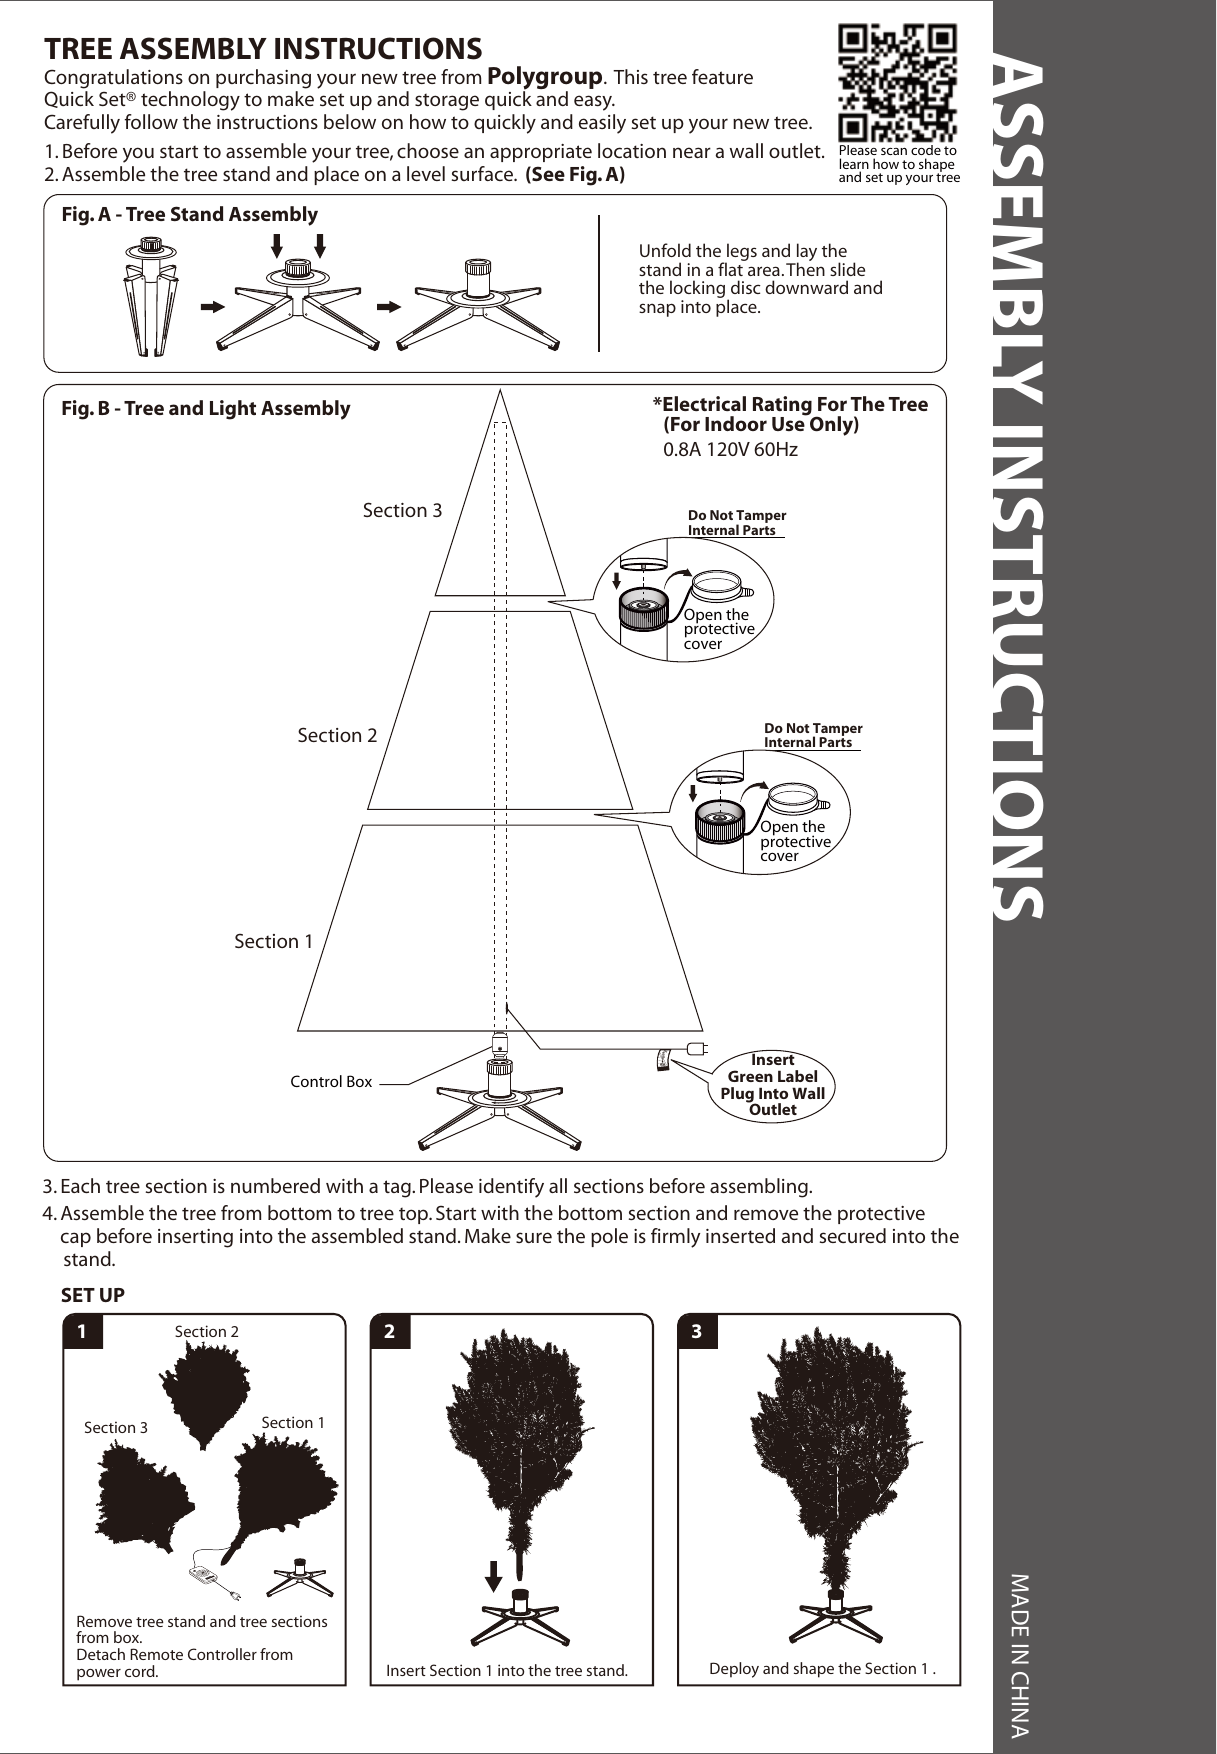 ASSEMBLY INSTRUCTIONS MADE IN CHINA*Electrical Rating For The Tree (For Indoor Use Only)0.8A 120V 60HzFig. B - Tree and Light Assembly1. Before you start to assemble your tree, choose an appropriate location near a wall outlet.2. Assemble the tree stand and place on a level surface.  (See Fig. A)Congratulations on purchasing your new tree from Polygroup.  This tree featureQuick Set® technology to make set up and storage quick and easy.Carefully follow the instructions below on how to quickly and easily set up your new tree.TREE ASSEMBLY INSTRUCTIONS3. Each tree section is numbered with a tag. Please identify all sections before assembling.4. Assemble the tree from bottom to tree top. Start with the bottom section and remove the protectivecap before inserting into the assembled stand. Make sure the pole is firmly inserted and secured into thestand.Section 3Section 2Section 1InsertGreen LabelPlug Into WallOutletDo Not TamperInternal PartsOpen theprotectivecoverDo Not TamperInternal PartsOpen theprotectivecoverFig. A - Tree Stand AssemblyUnfold the legs and lay the stand in a flat area. Then slide the locking disc downward and snap into place. Please scan code tolearn how to shape  and set up your tree1 2Section 1Section 3Section 2Remove tree stand and tree sections from box.Detach Remote Controller from power cord. Insert Section 1 into the tree stand. Deploy and shape the Section 1 .SET UP3Control Box